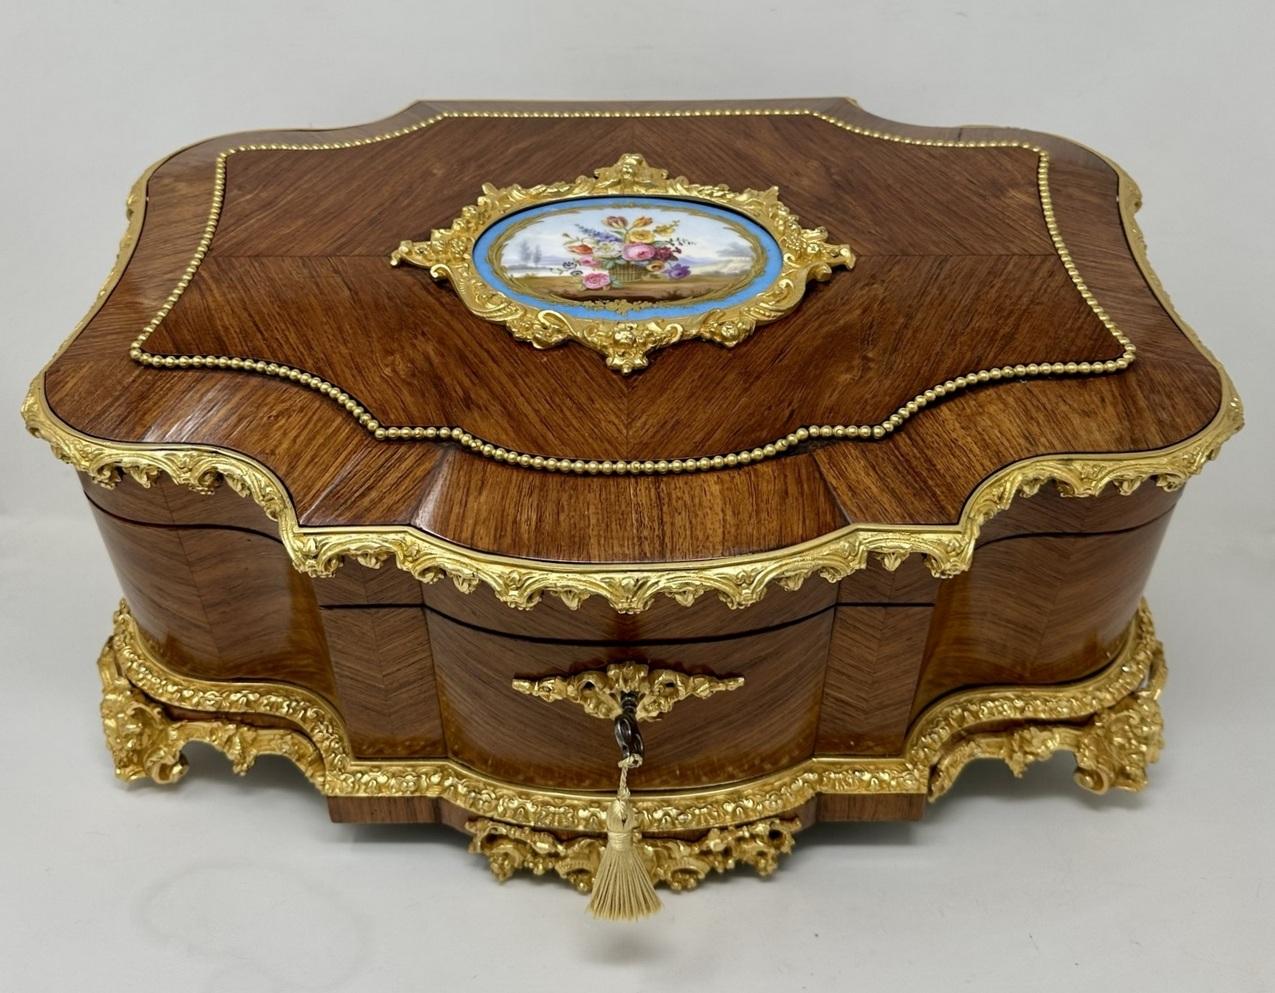 An Exceptionally Fine Example of a Signed French Ormolu Mounted Well Grained Kingwood Jewellery Casket or Table Box of large proportions made in France by renowned furniture makers Vervelle Audot. Third quarter of the Nineteenth Centiry. 

The main